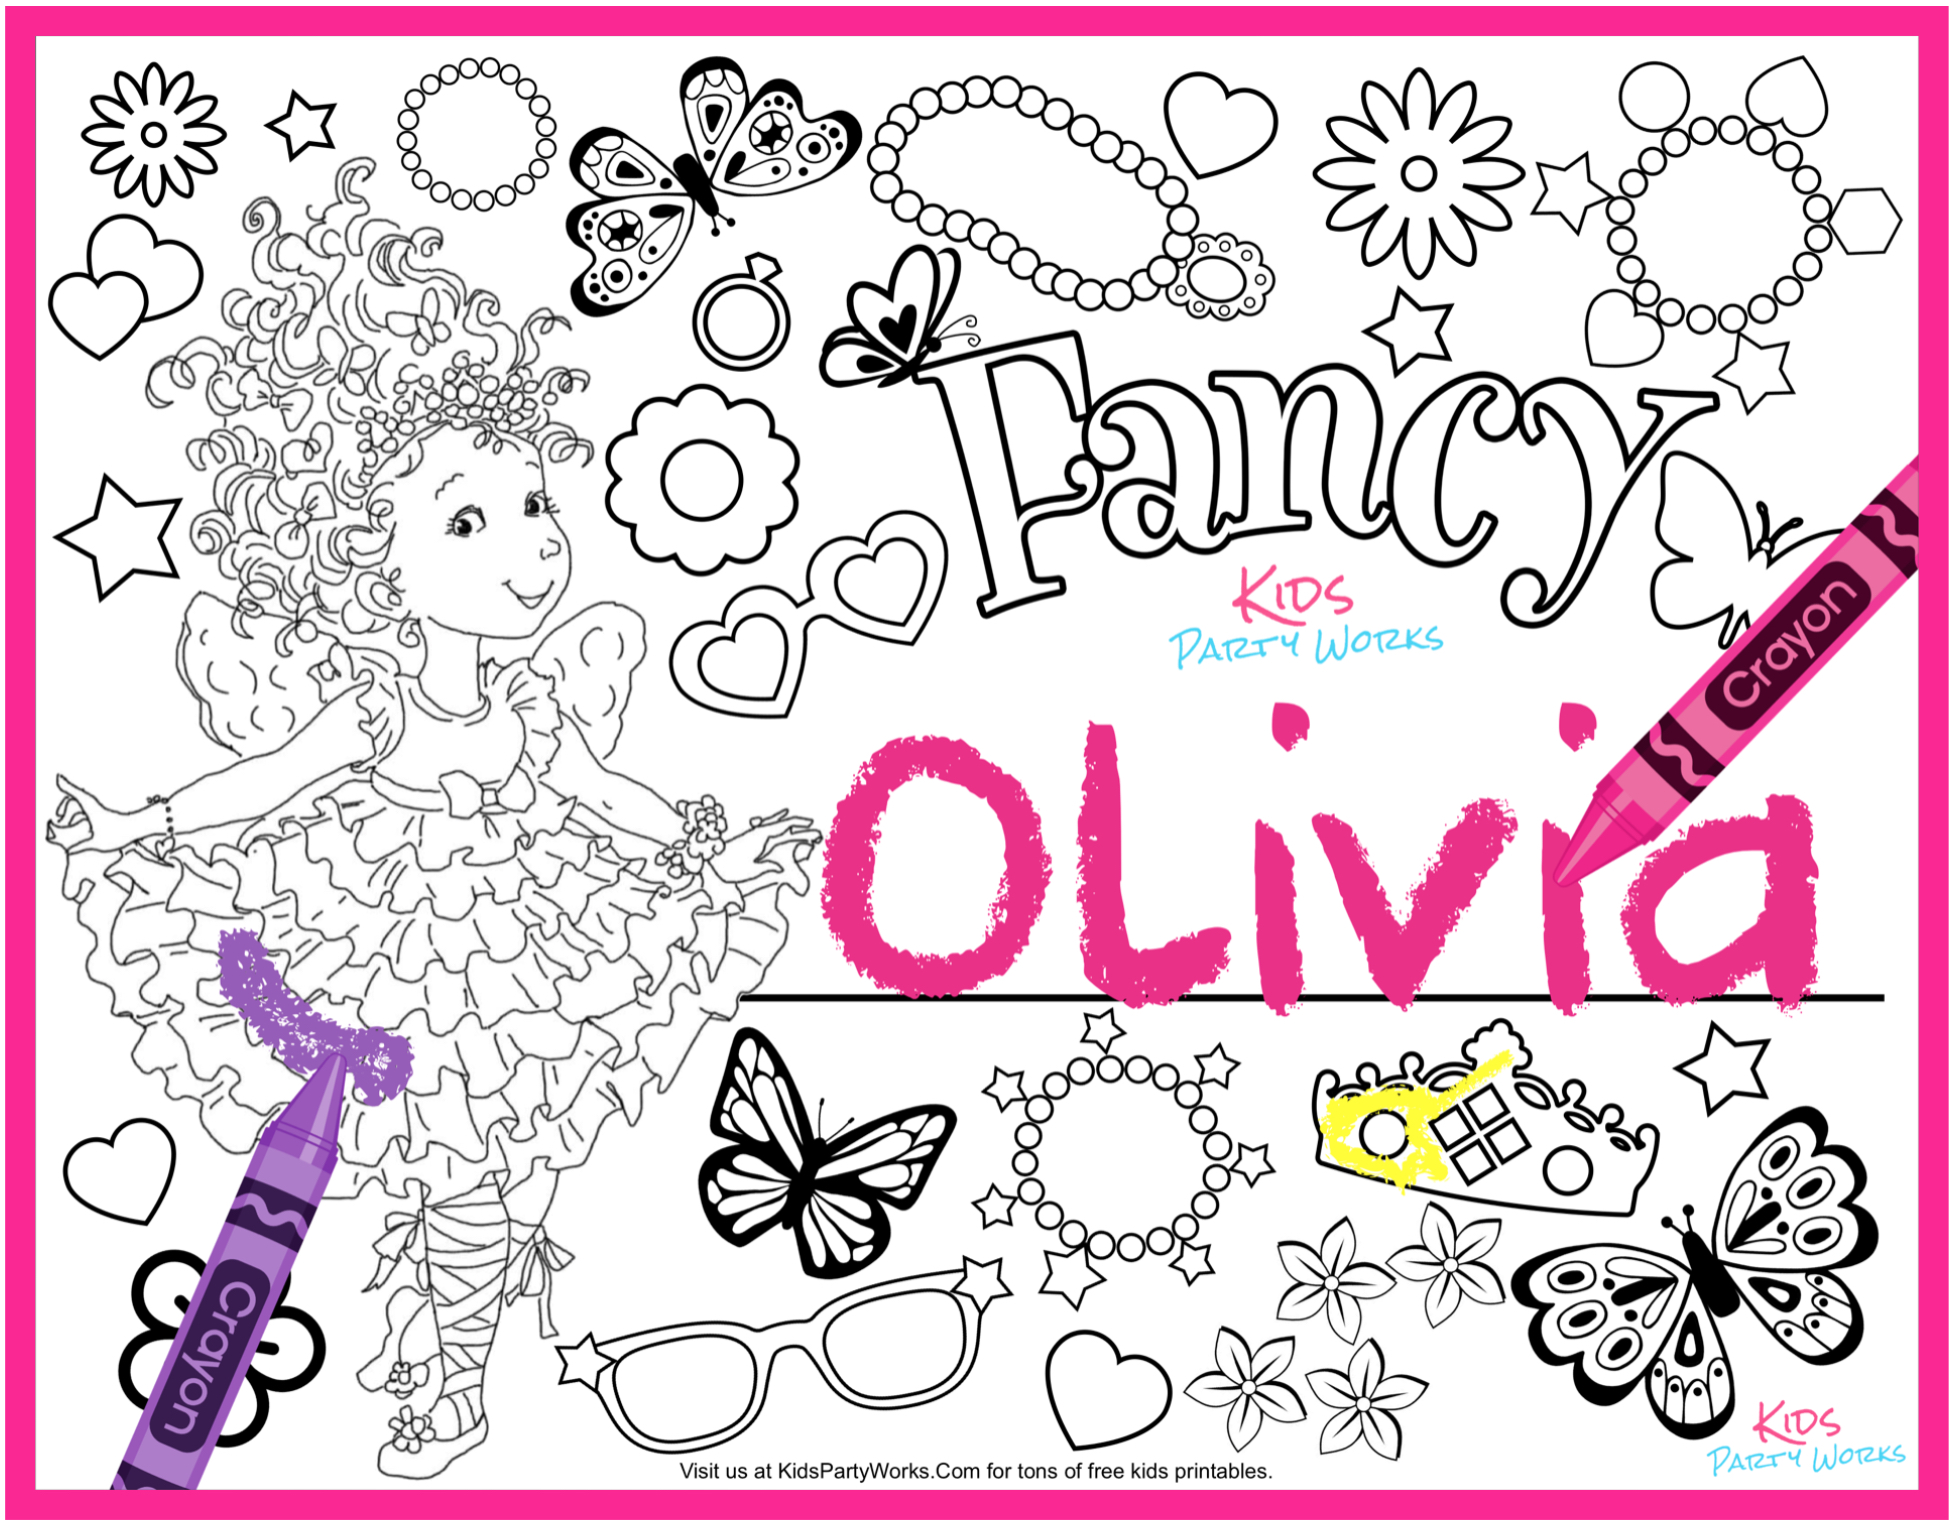 Free fancy nancy coloring page to personalize with your name.